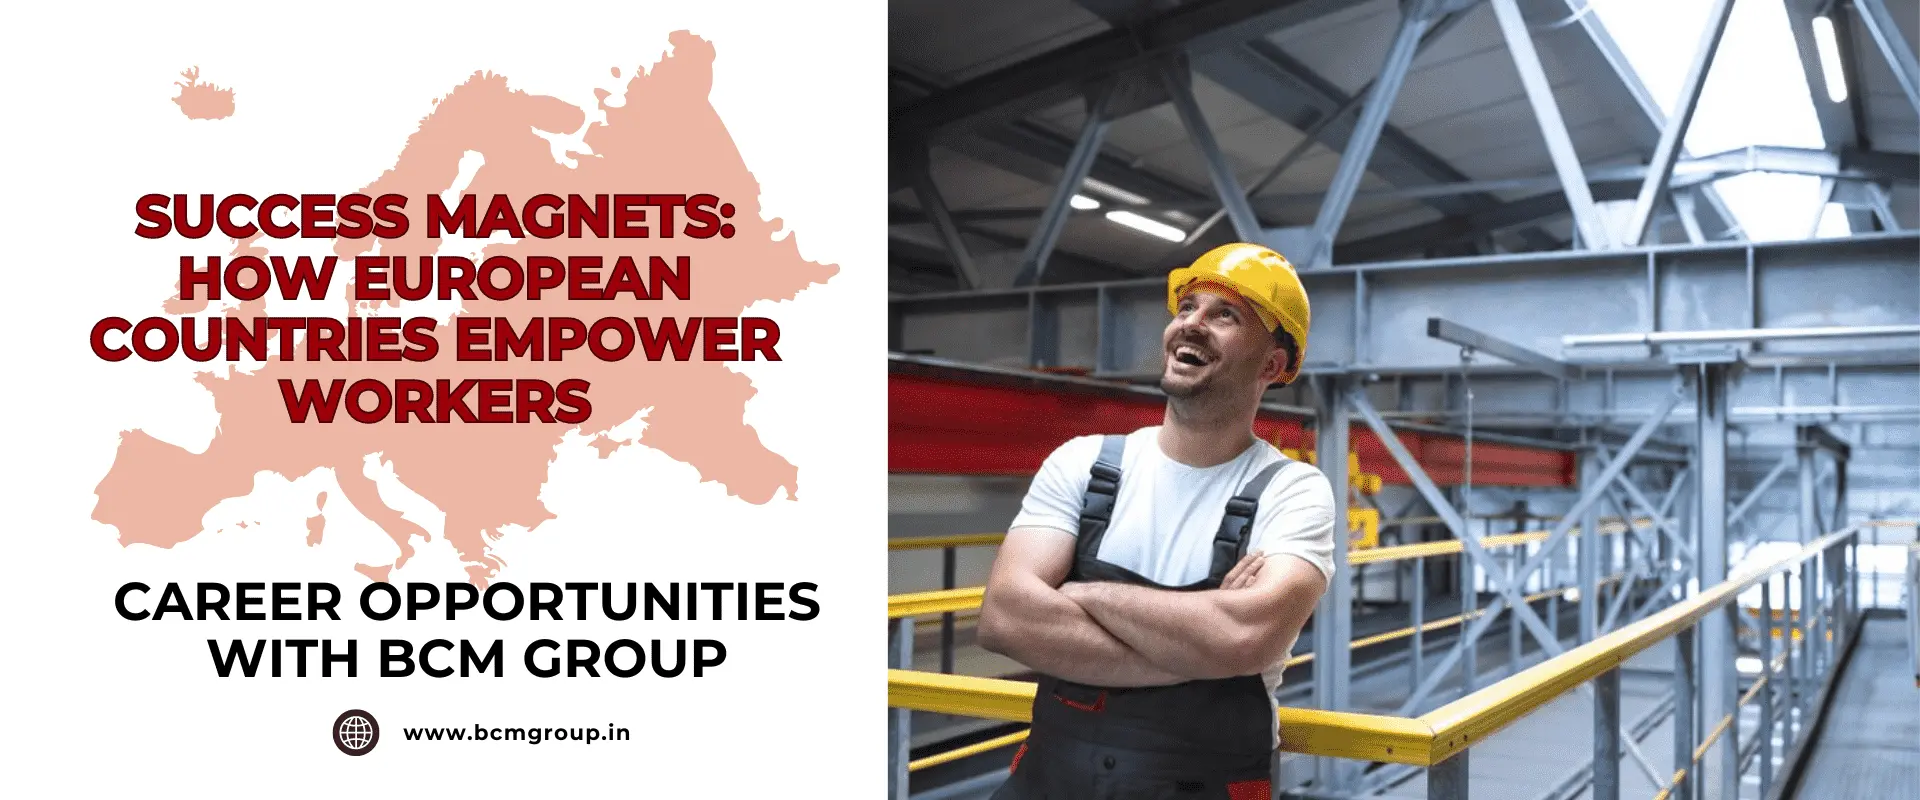 Success Magnets: How European Countries Empower Workers